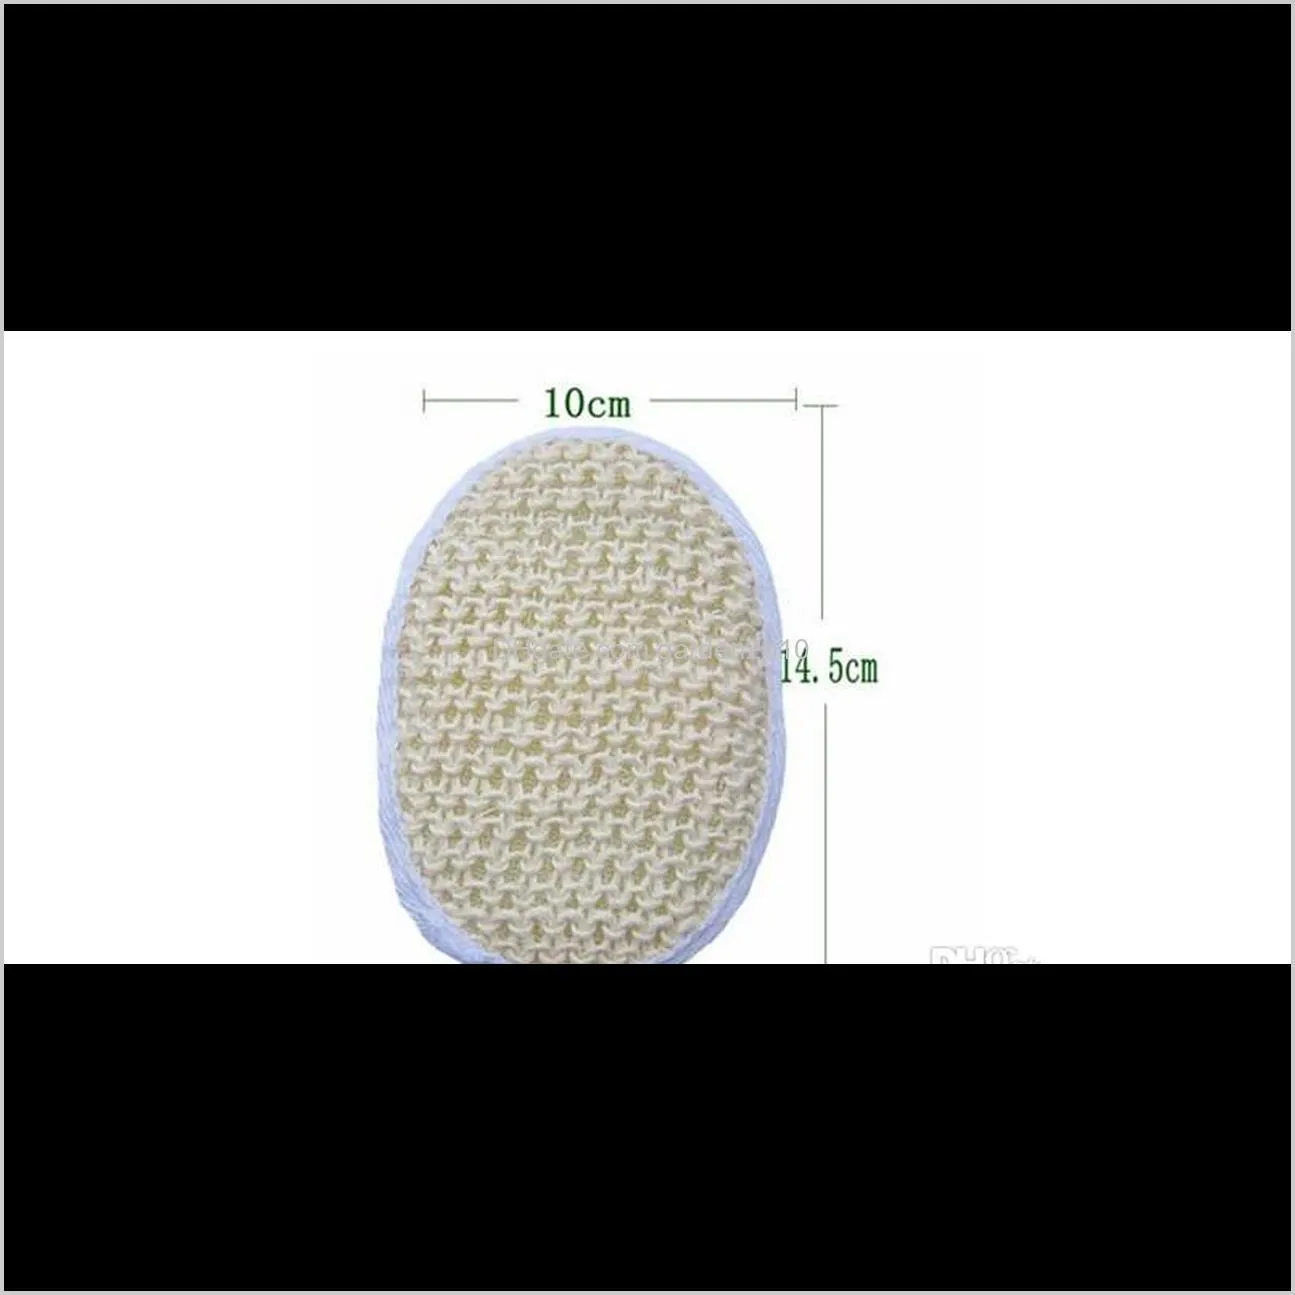 10x14.5cm sisal pads oval shaped exfoliating sisal sponge with terry cloth remove the dead skin spa massage cleansing sisal sponge